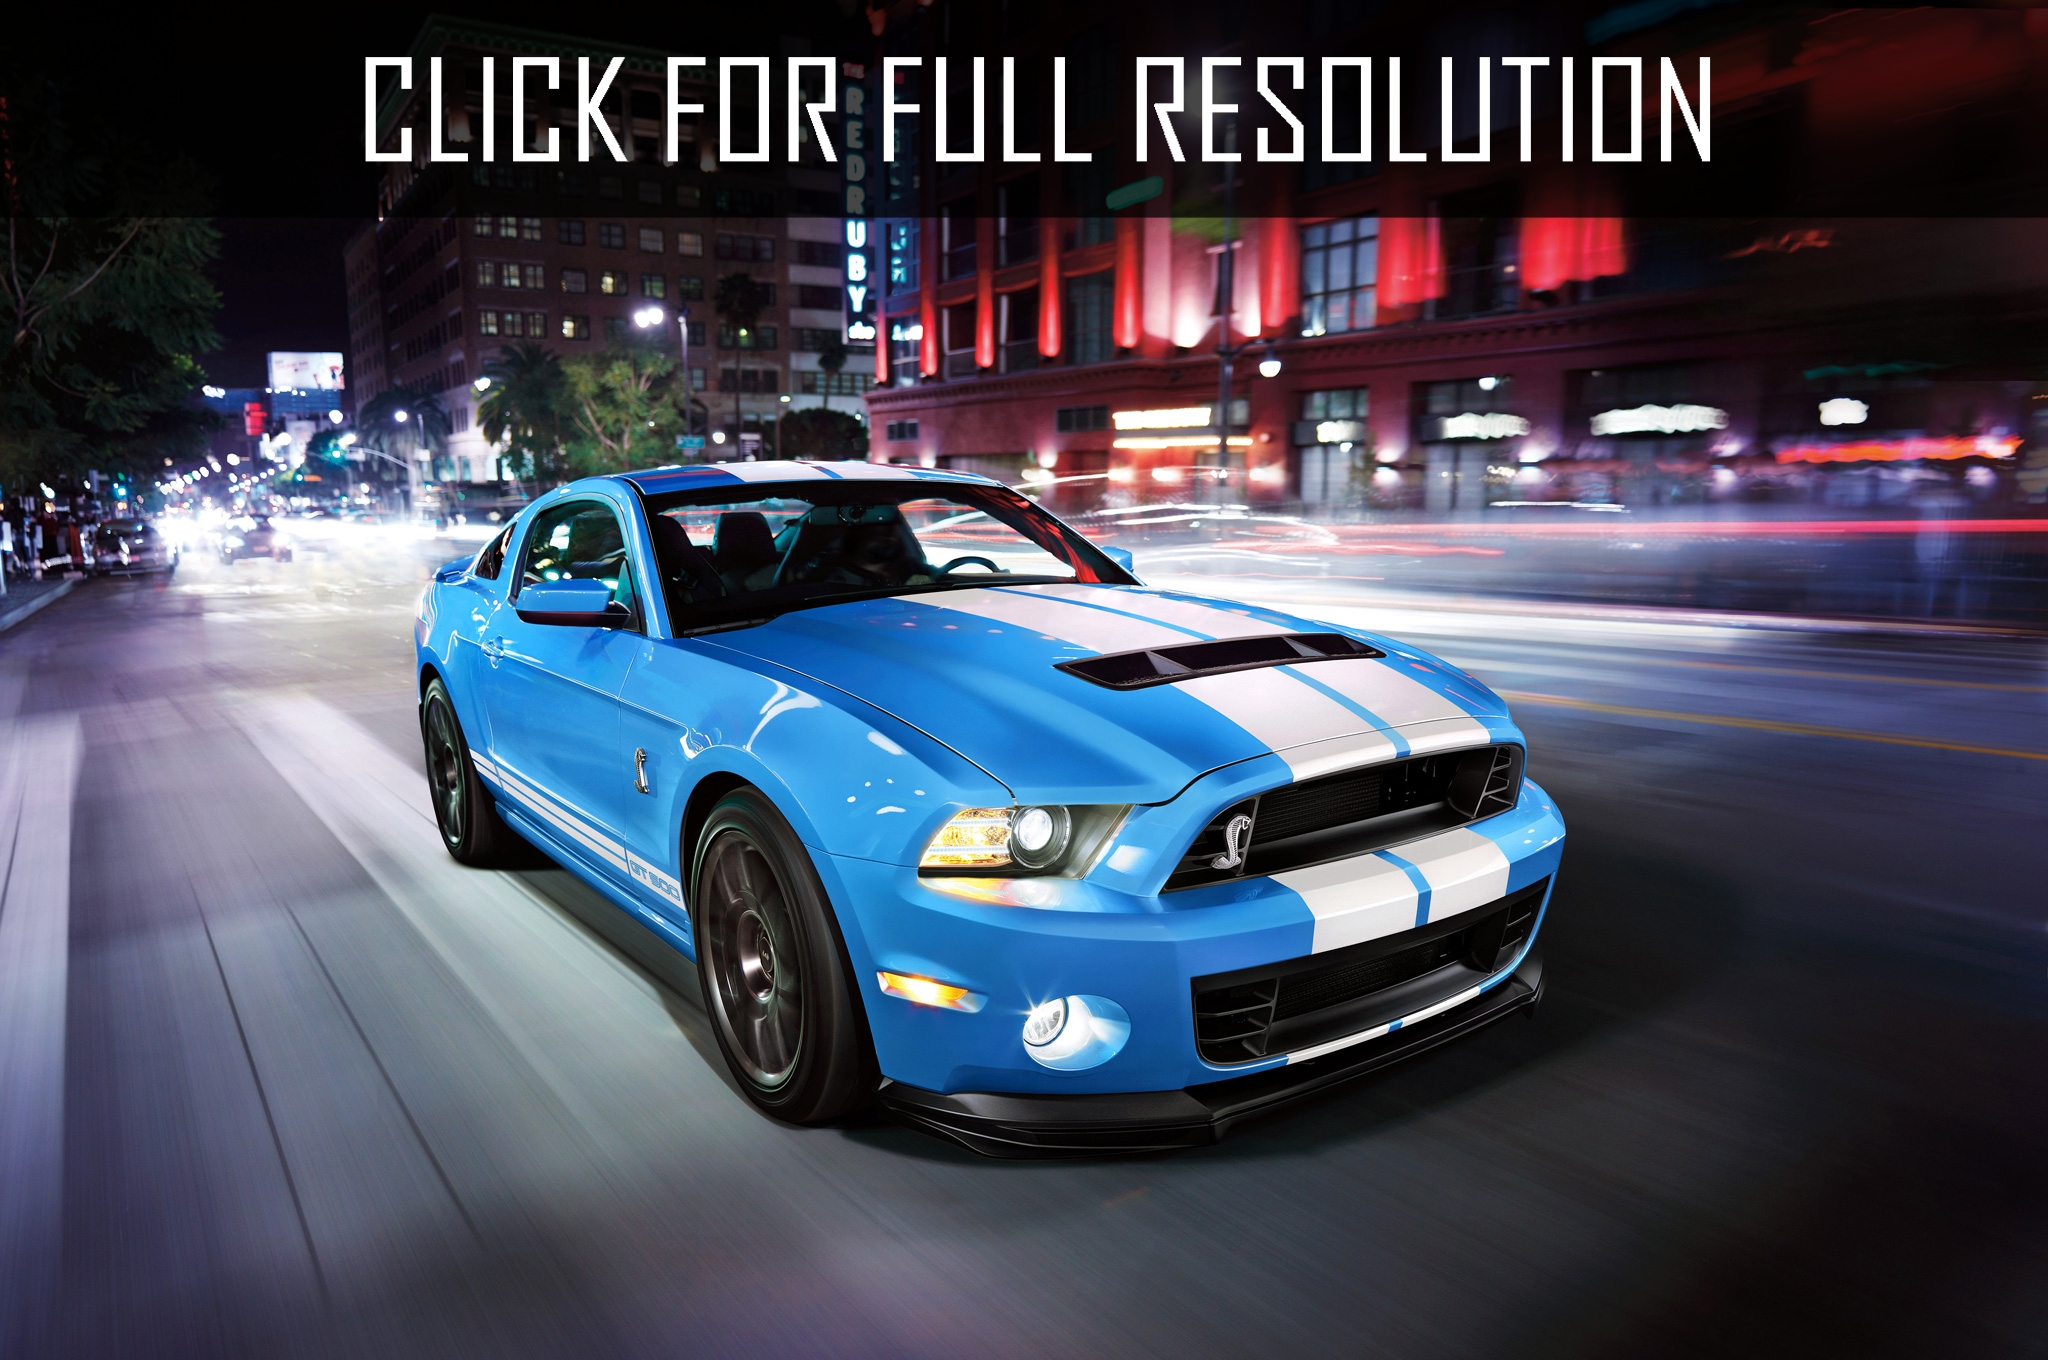 Ford Shelby 2014